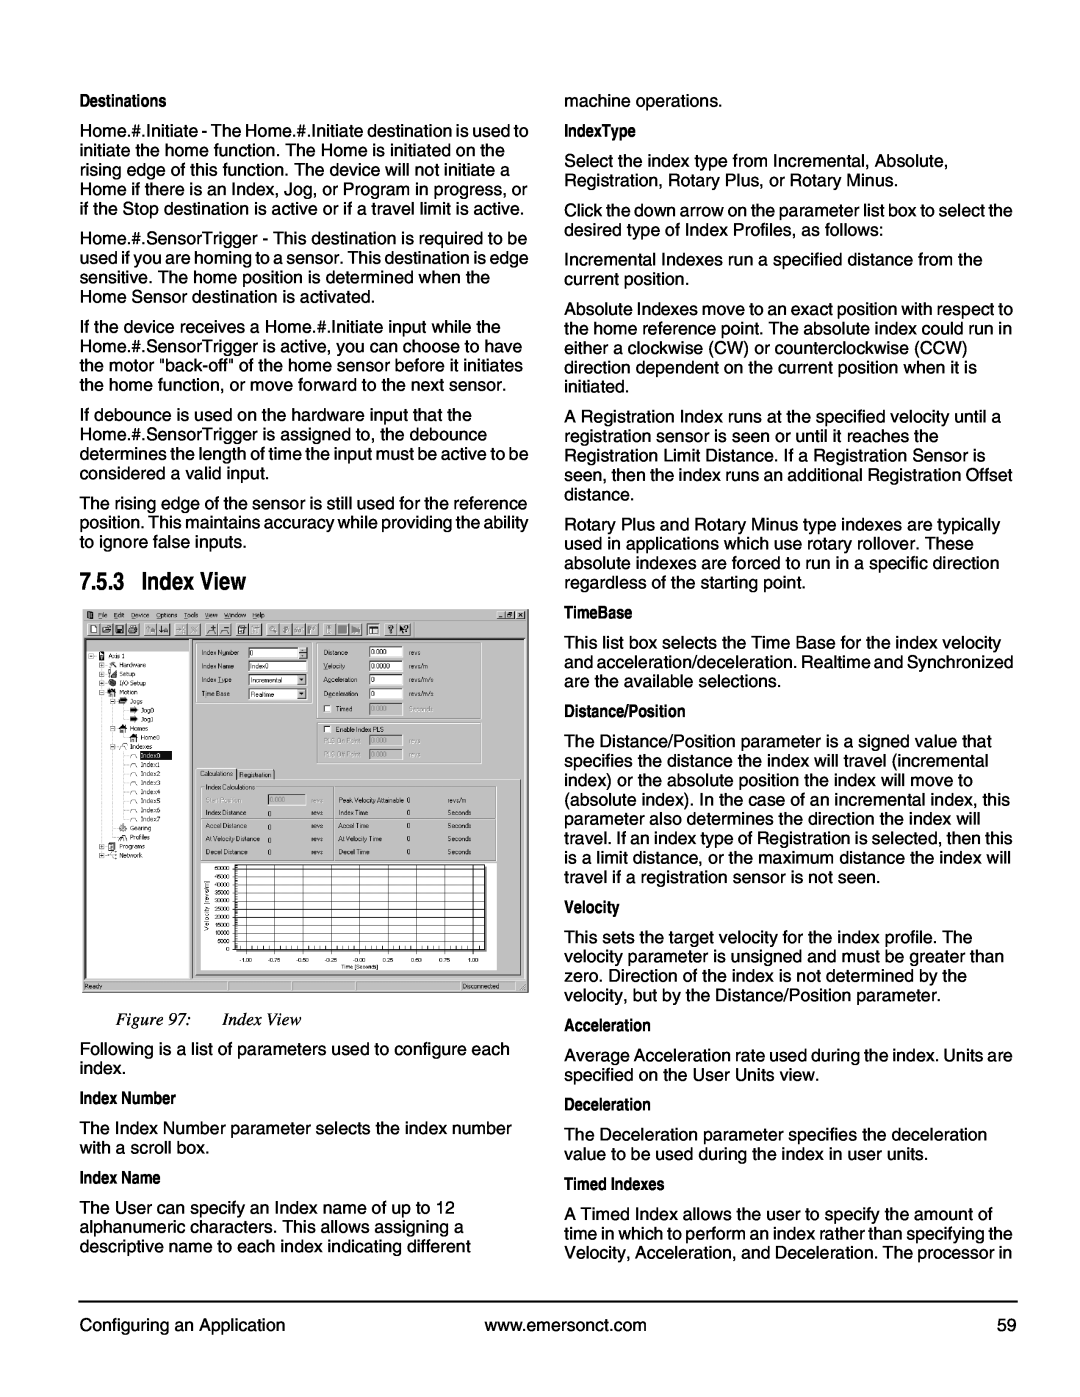 Emerson P/N 400361-00 manual Index View 